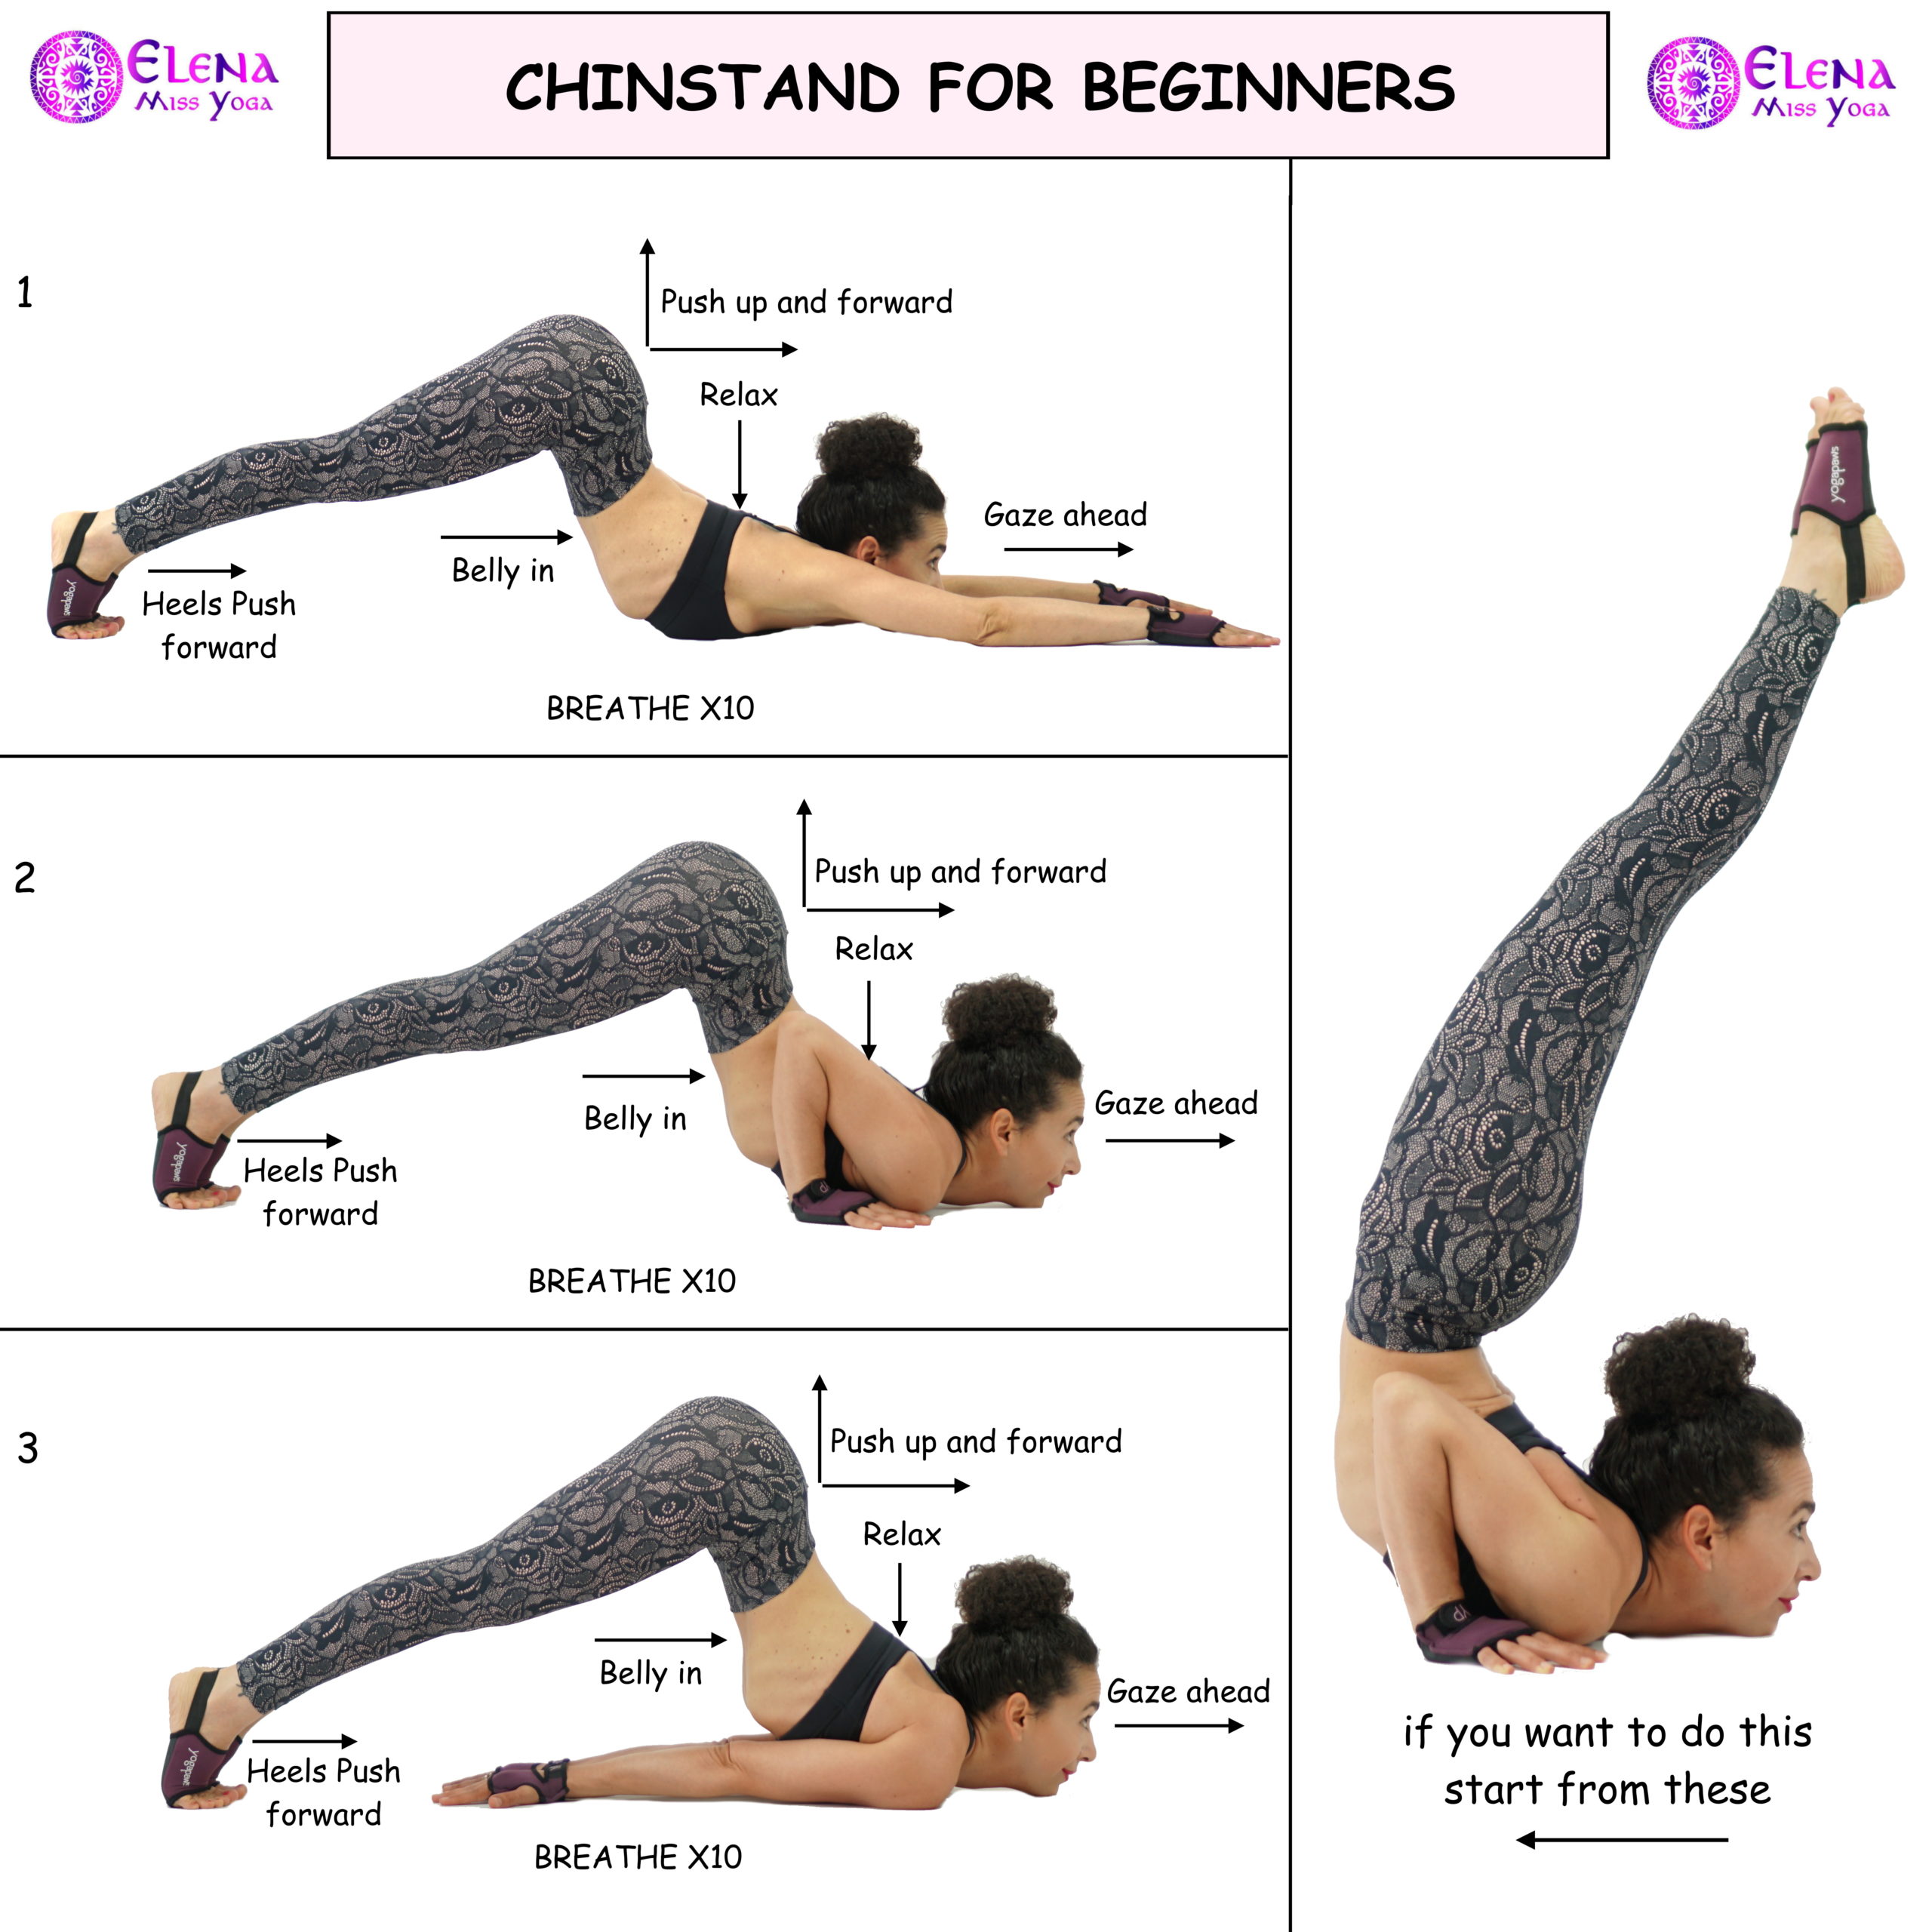 CHIN AND CHEST STAND A B C COURSE – CLASS 1 – Elena Miss Yoga